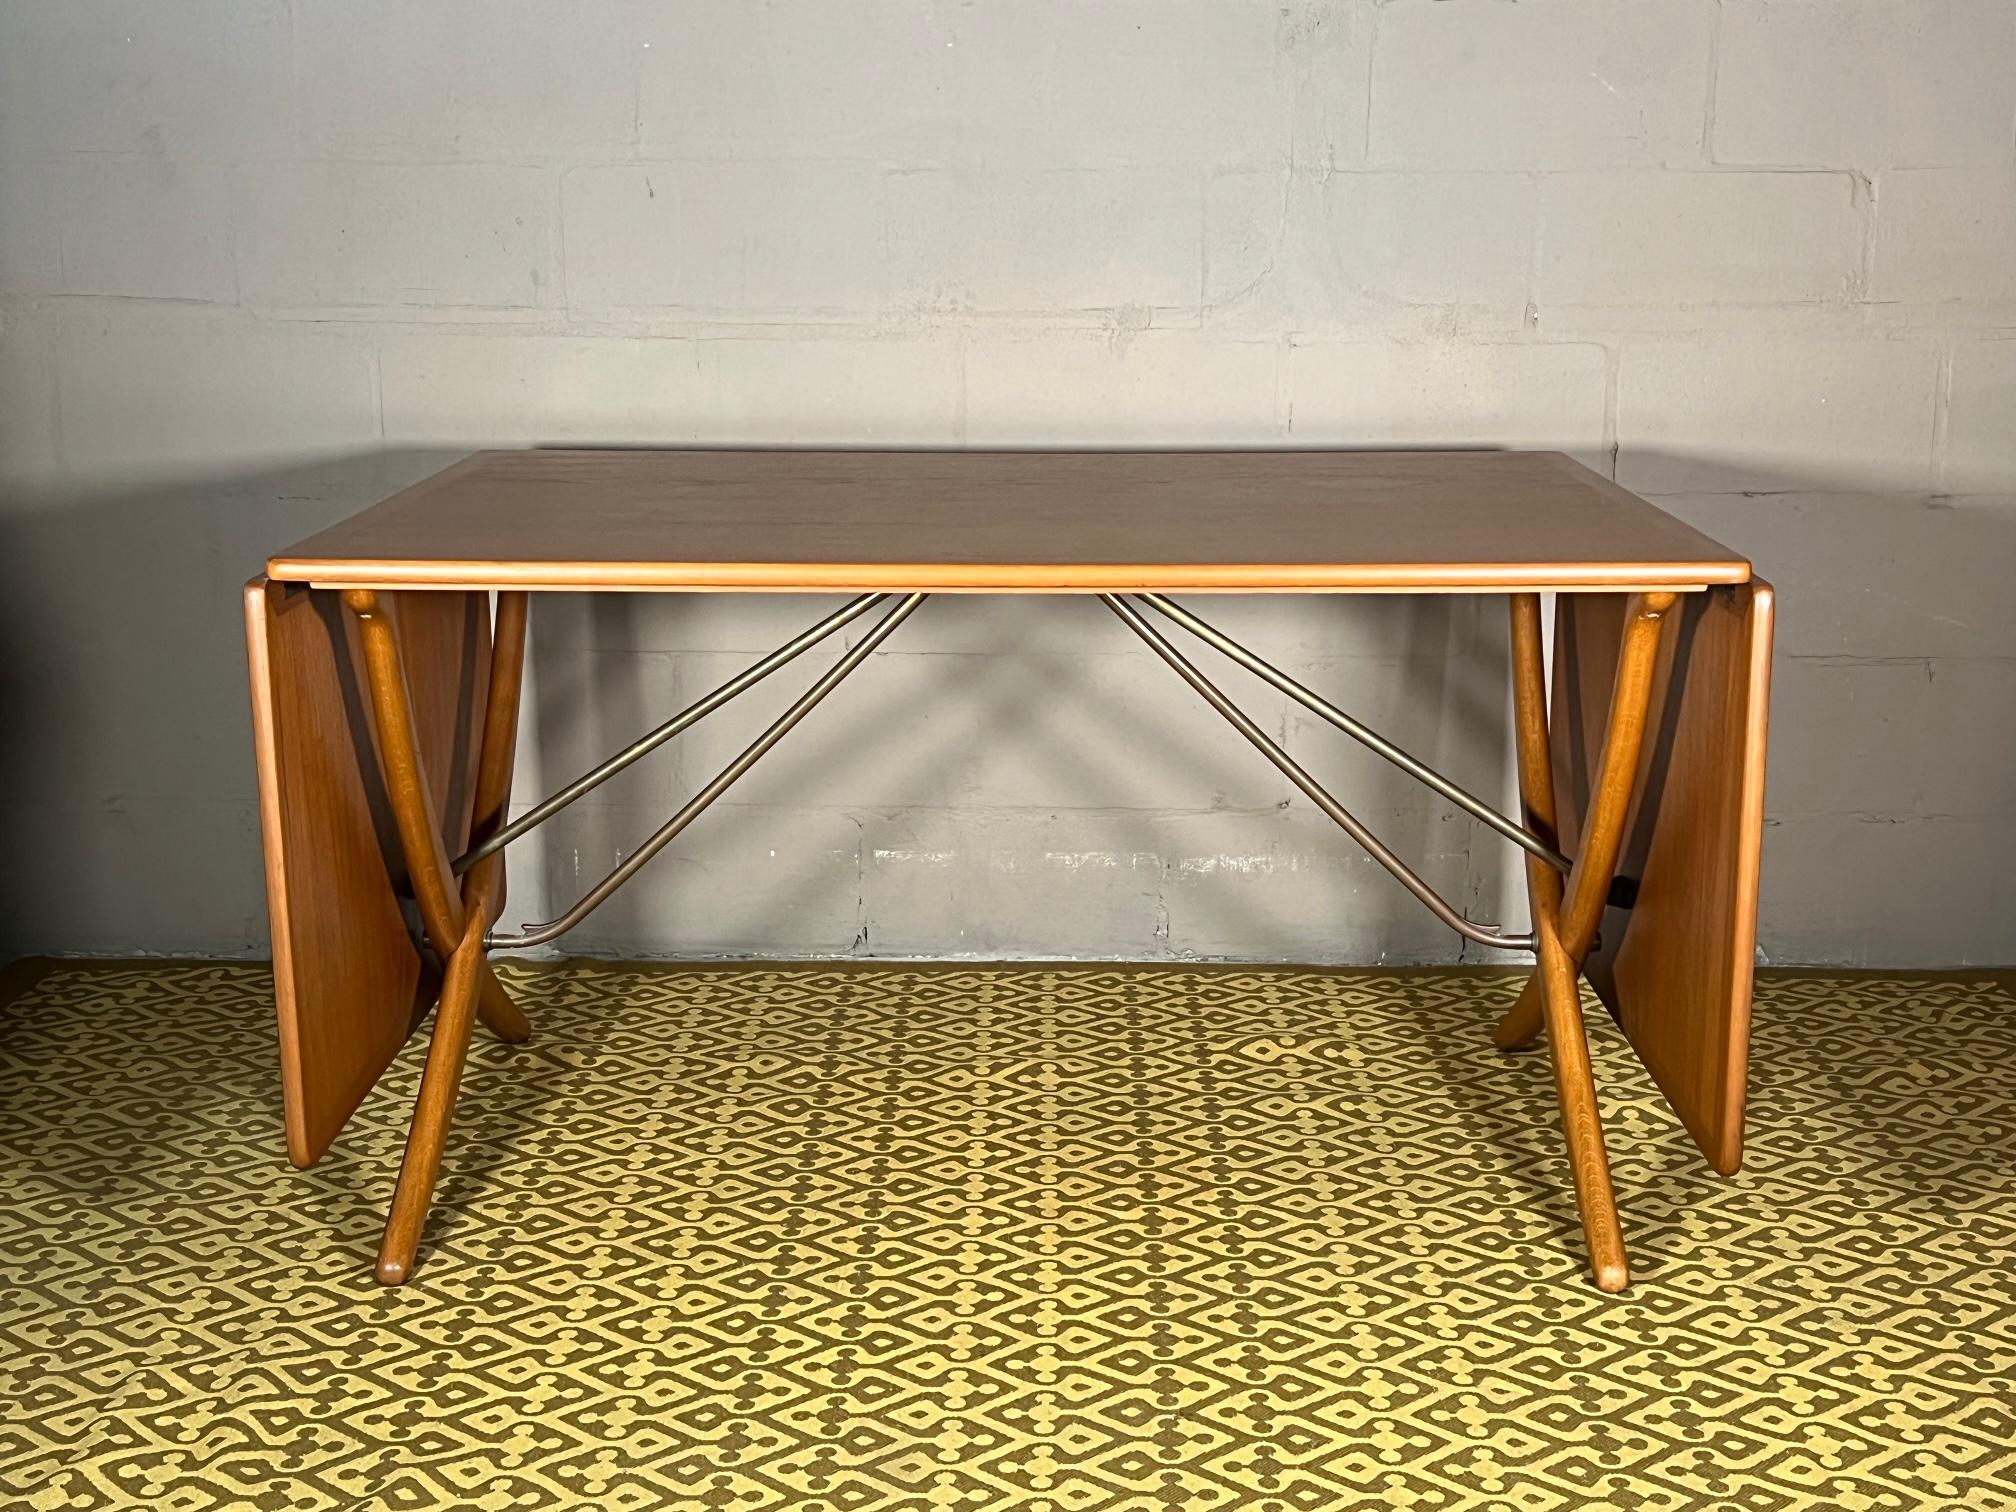 A classic drop leaf dining table by Hans Wegner manufactured by Andreas Tuck, Denmark, ca' 1950's. Top is oak and legs are teak, with original brass pop up mechanism that is such a trademark feature of this design. When opened measures 28